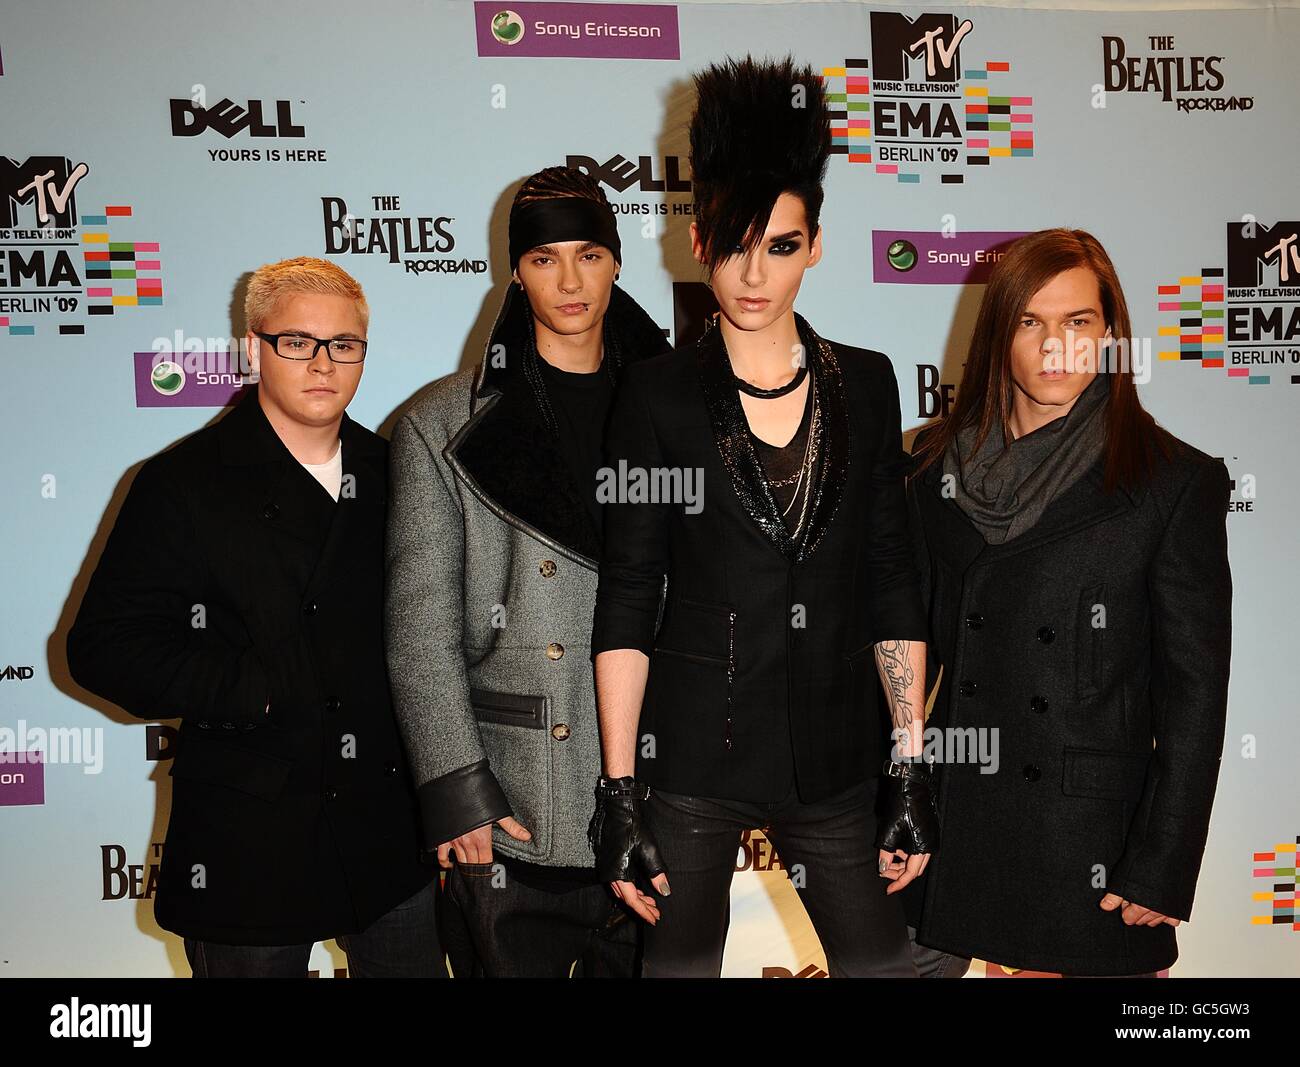 (left to right) Gustav Schaefer, Tom Kaulitz, Bill Kaulitz and Georg Listing of Tokio Hotel arriving for the 2009 MTV Europe Music Awards at O2 World in Berlin, Germany. Stock Photo